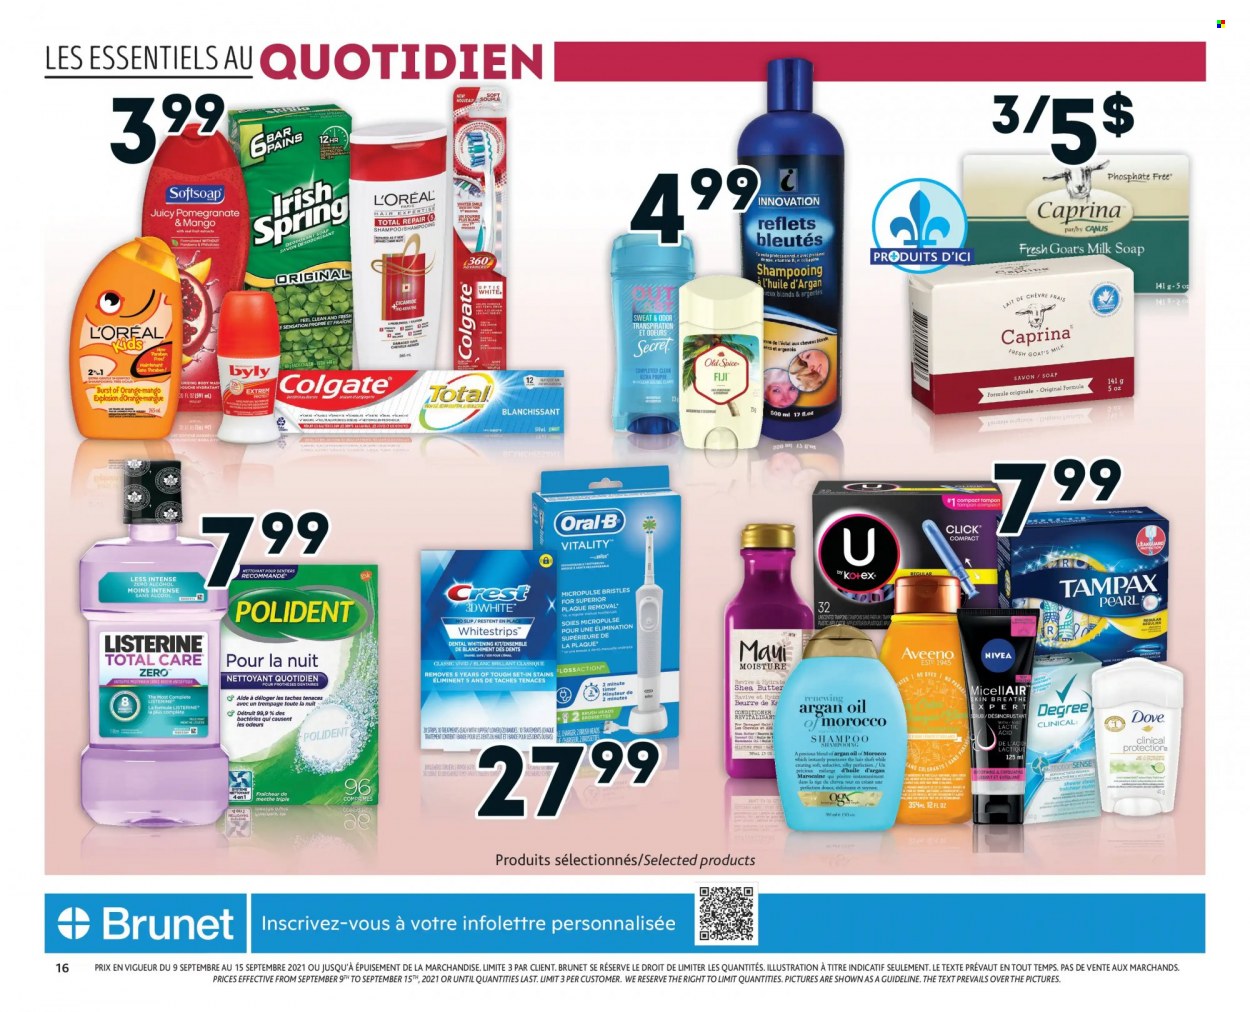 thumbnail - Brunet Flyer - September 09, 2021 - September 15, 2021 - Sales products - Aveeno, Softsoap, soap, Polident, Crest, tampons, L’Oréal, shea butter, argan oil, Dove, Colgate, Listerine, shampoo, Tampax, Nivea, Old Spice, Oral-B. Page 13.